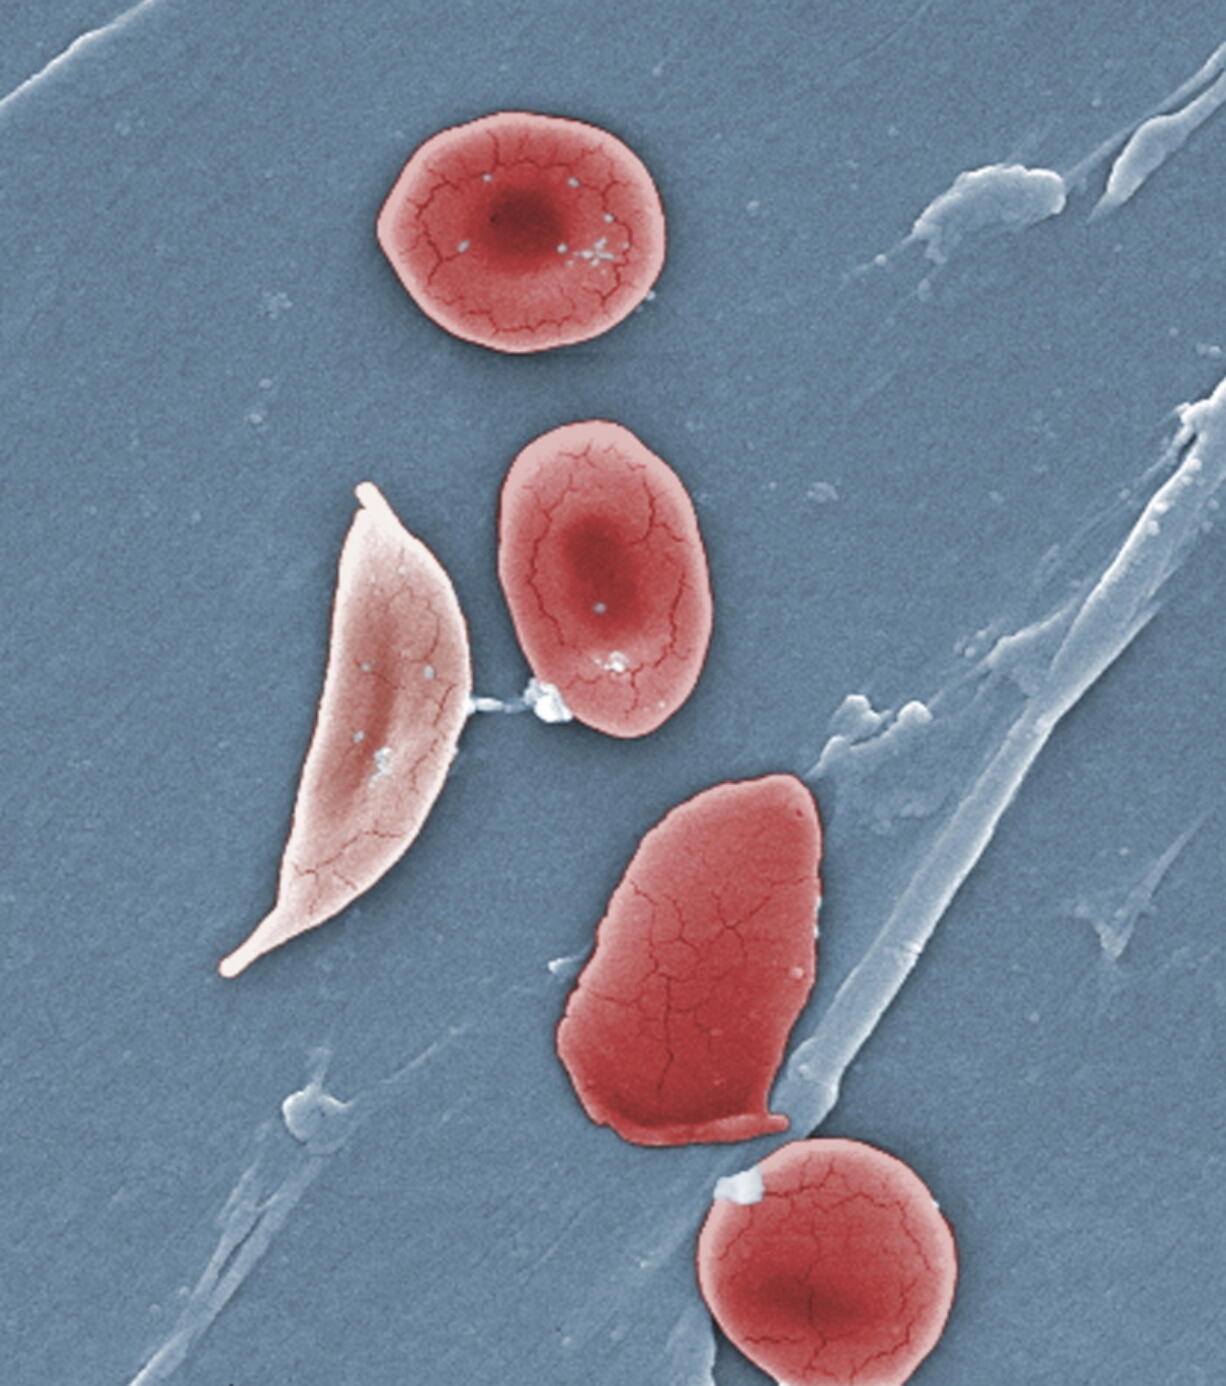 FILE - This 2009 colorized microscope image made available by the Sickle Cell Foundation of Georgia via the Centers for Disease Control and Prevention shows a sickle cell, left, and normal red blood cells of a patient with sickle cell anemia. A study of U.S. children with sickle cell disease found fewer than half get a needed screening for stroke, a common complication. And only about half or fewer get a treatment that can help with pain and anemia, the study found. The Centers for Disease Control and Prevention released the study Tuesday, Sept. 20, 2022, and called for more screening and treatment.